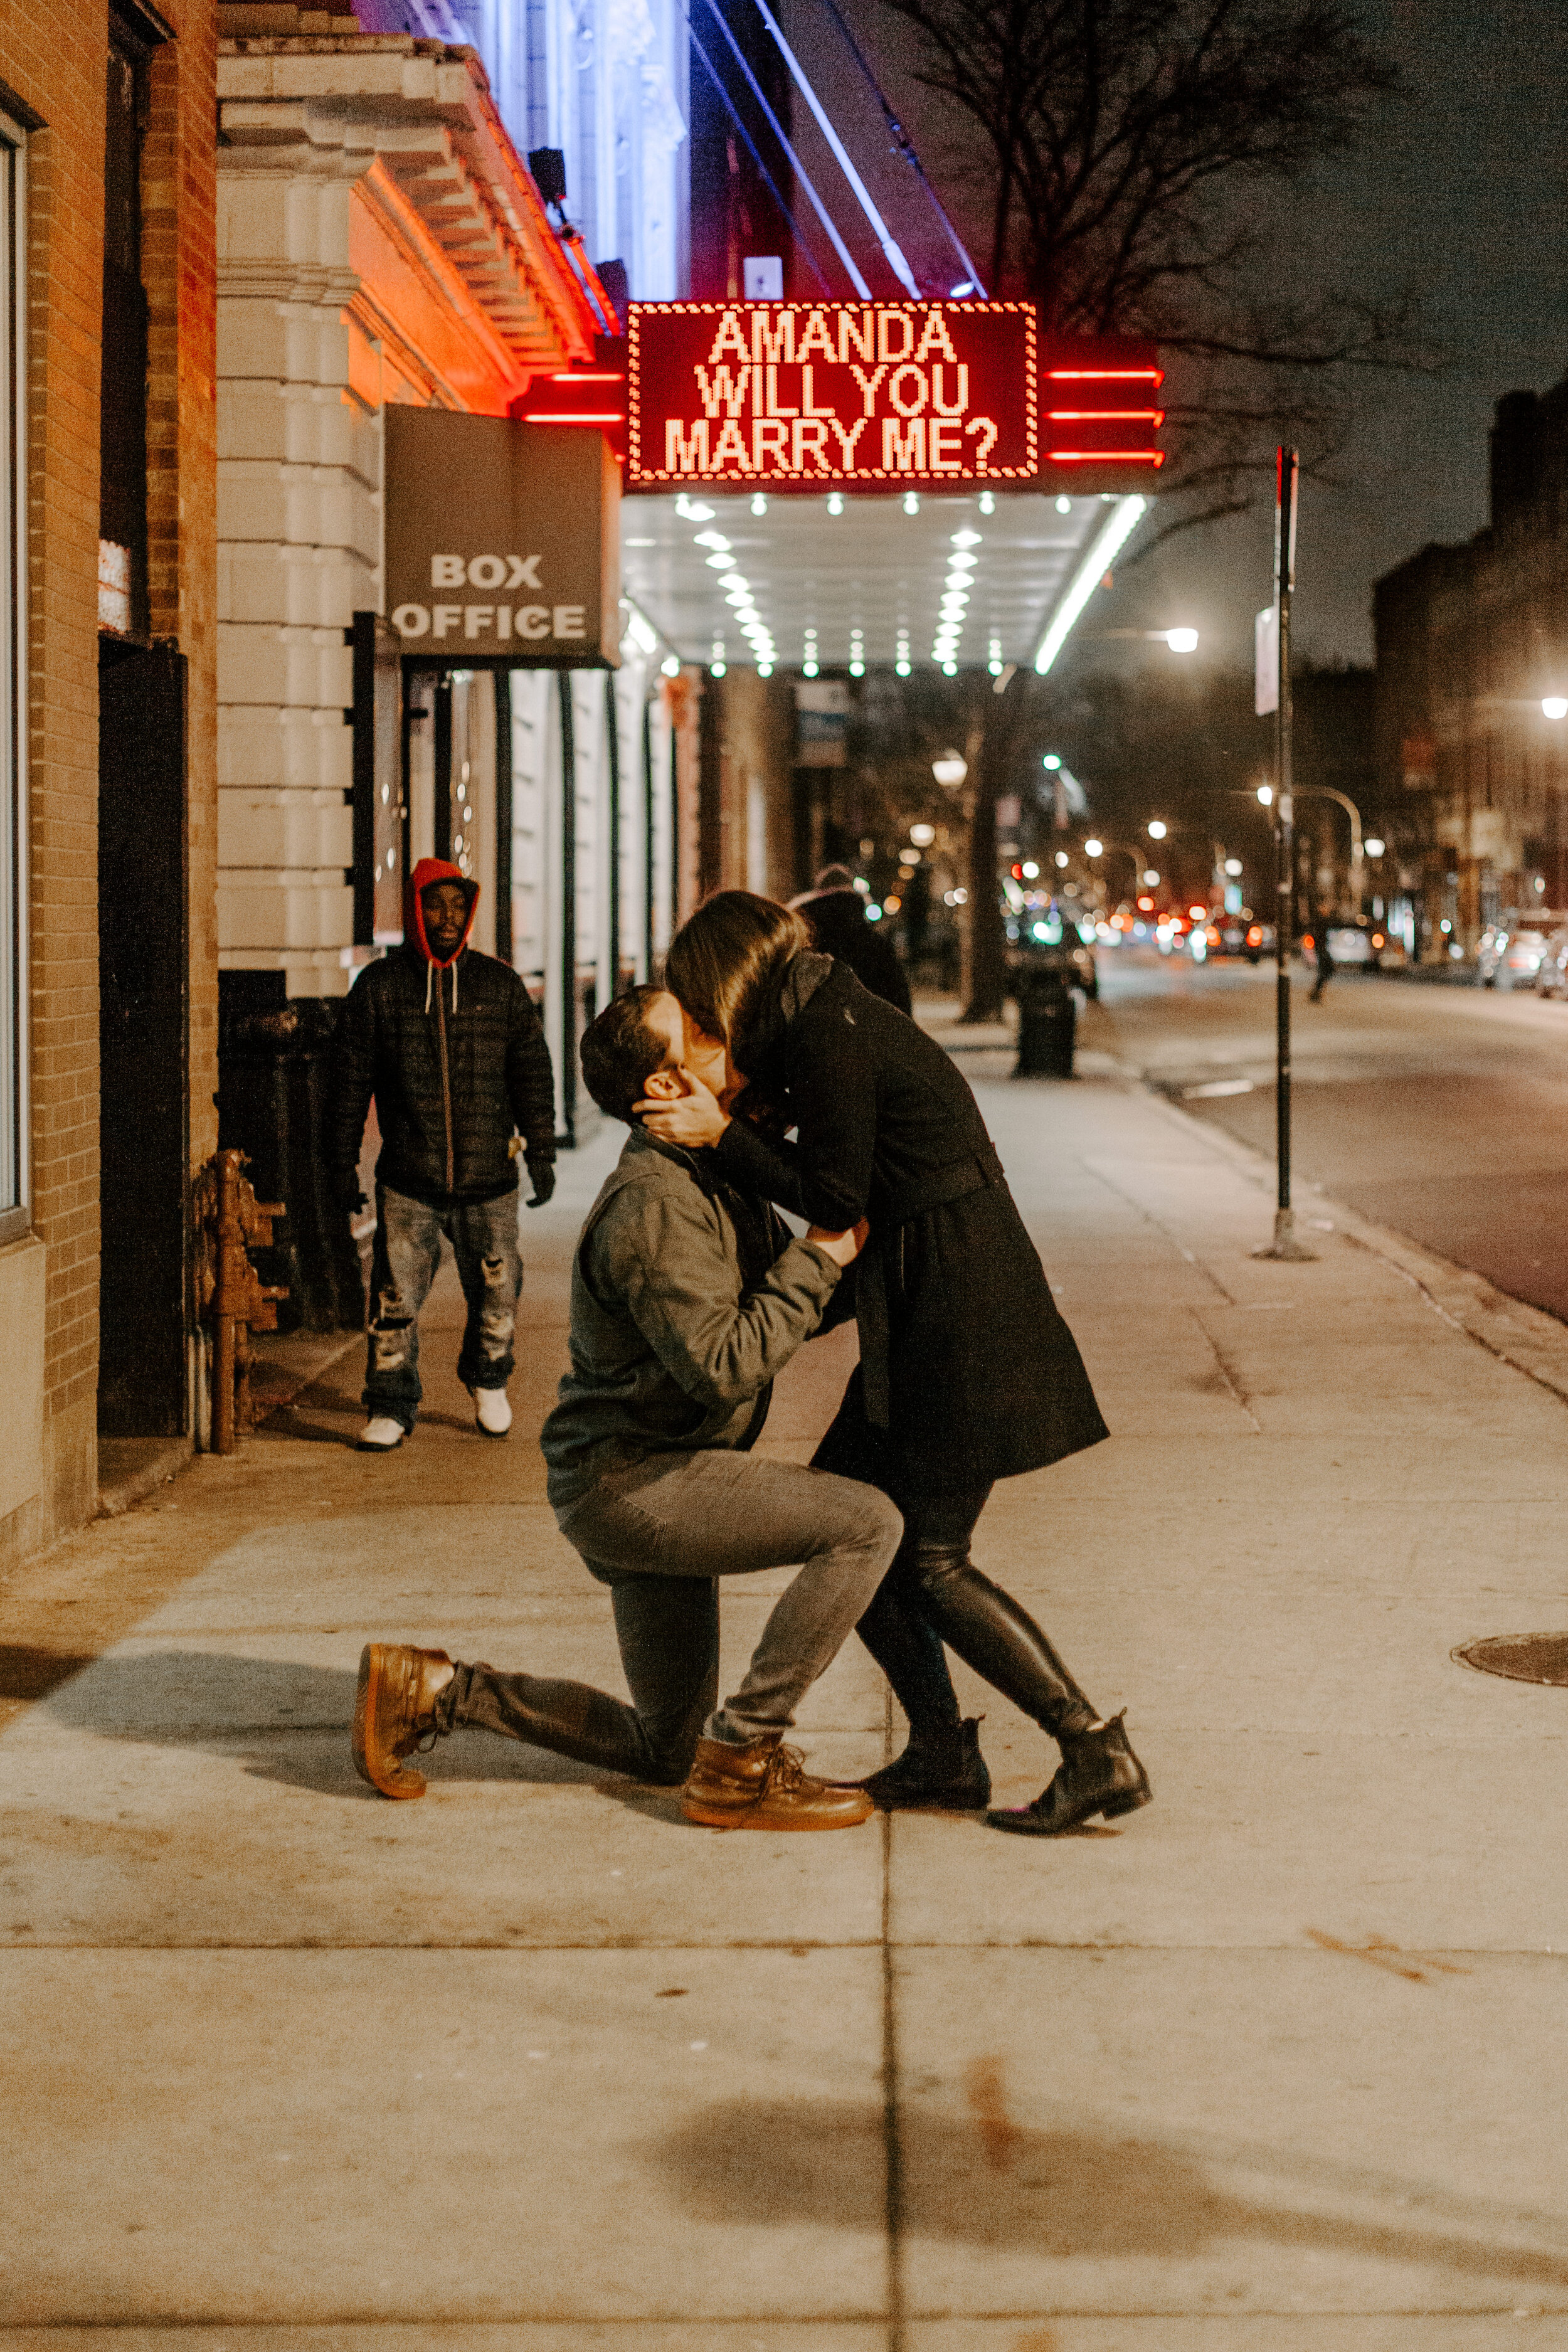  Chicago surprise proposal, woman leans down and kisses her boyfriend as he proposes in front of theater marquee reading Amanda Will You Marry Me? Chicago engagement photographer, Lucy B. Photography 